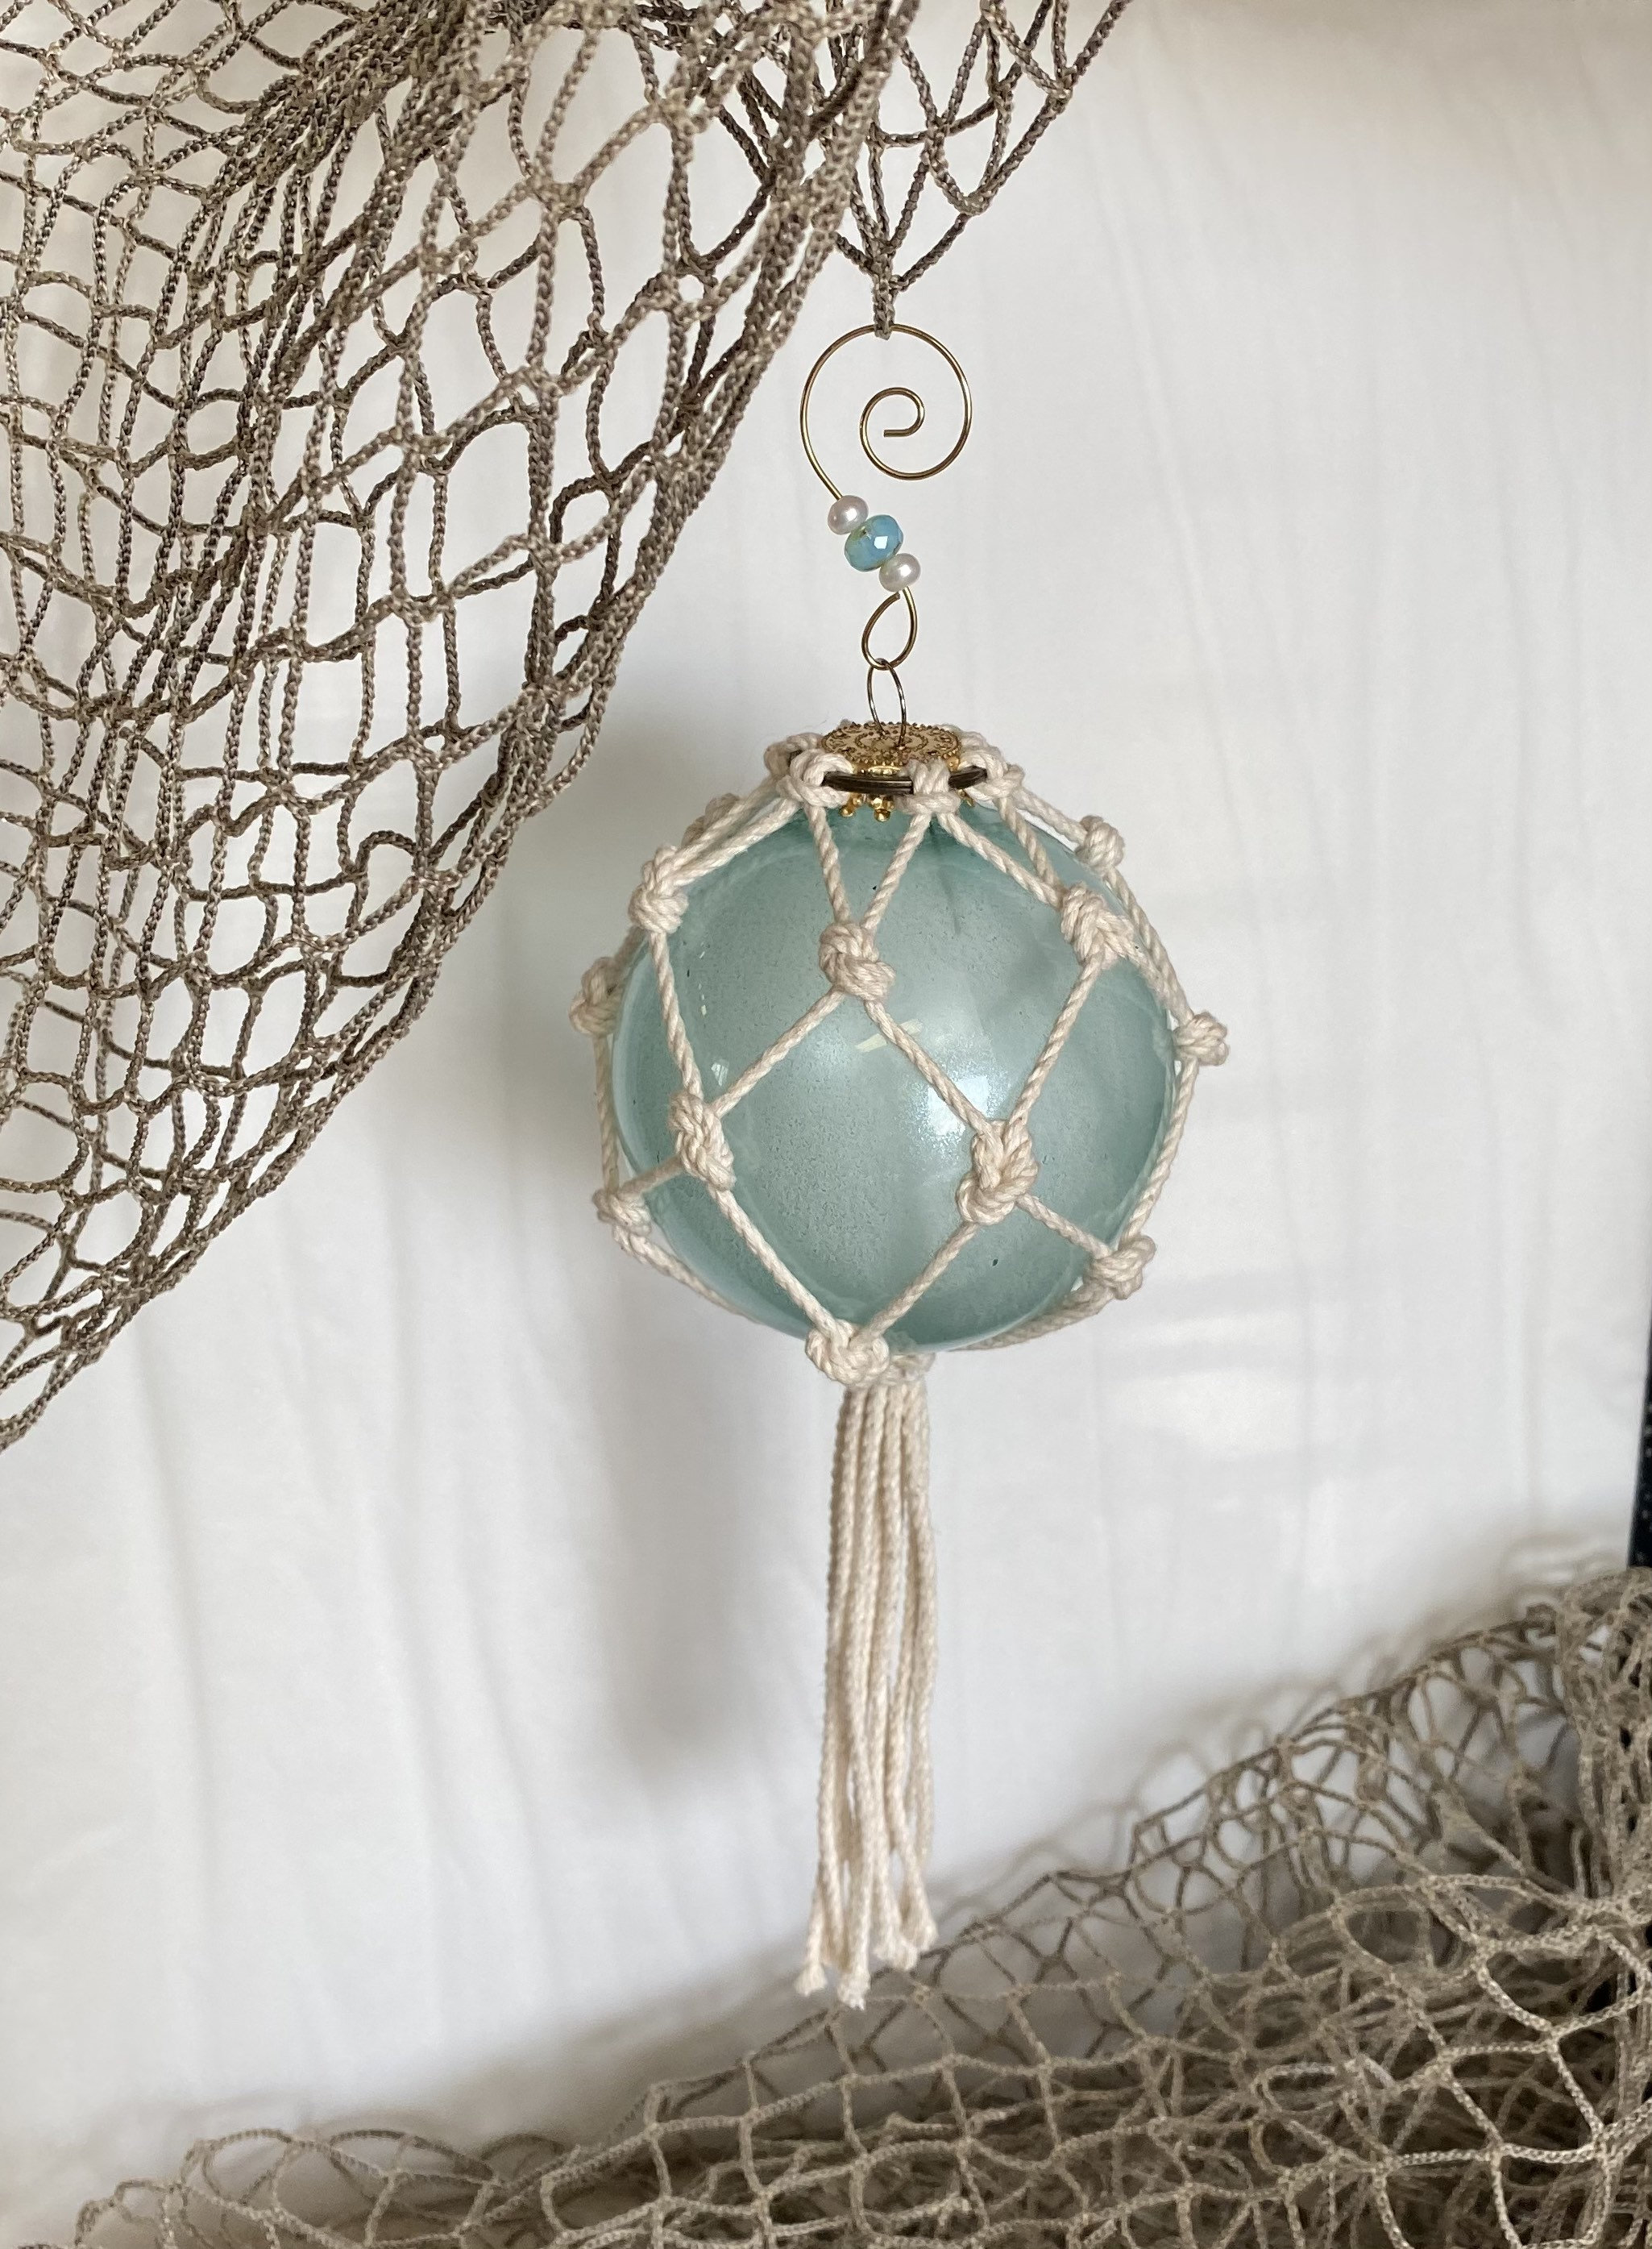 Mermaid Floats Lightweight Glass and Macrame Net Ornament With Beaded Hook  Coastal Decor and Gifts -  Canada